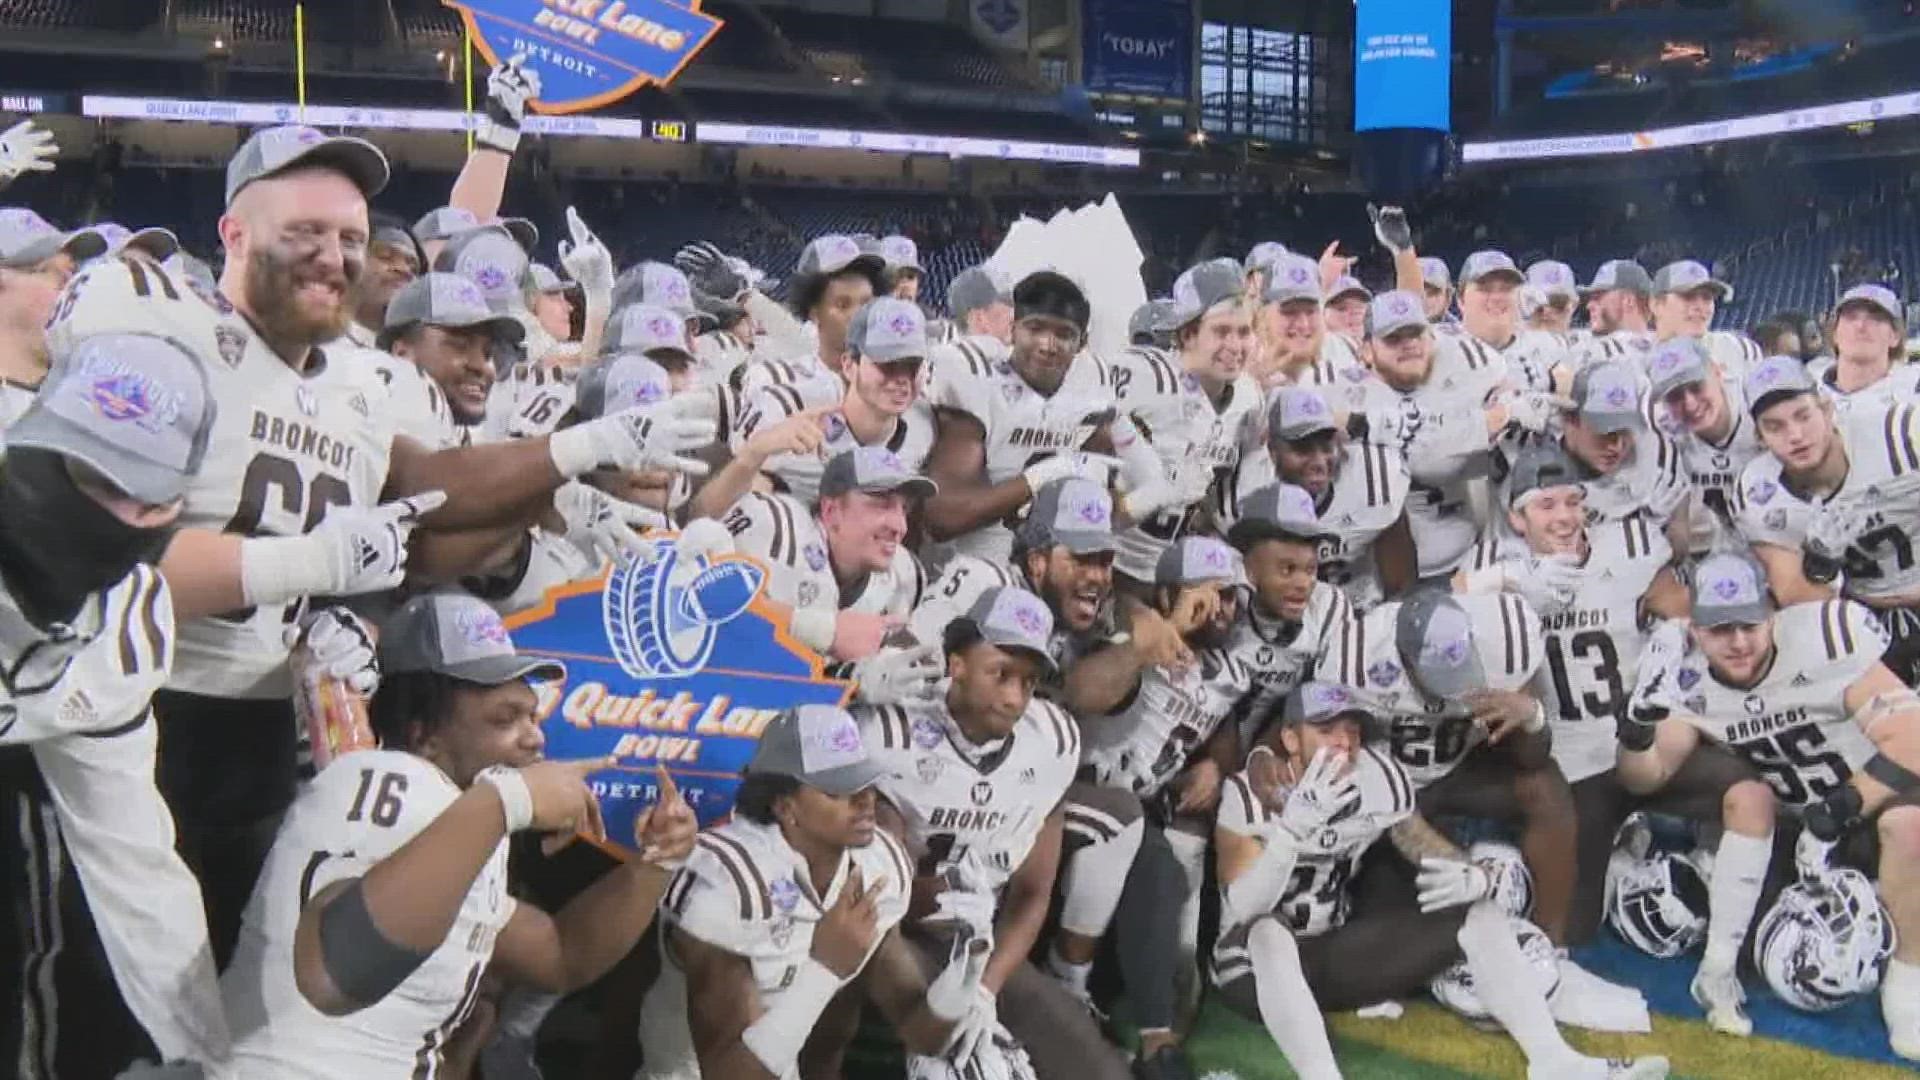 Western Michigan University is celebrating its second bowl game win in program history.